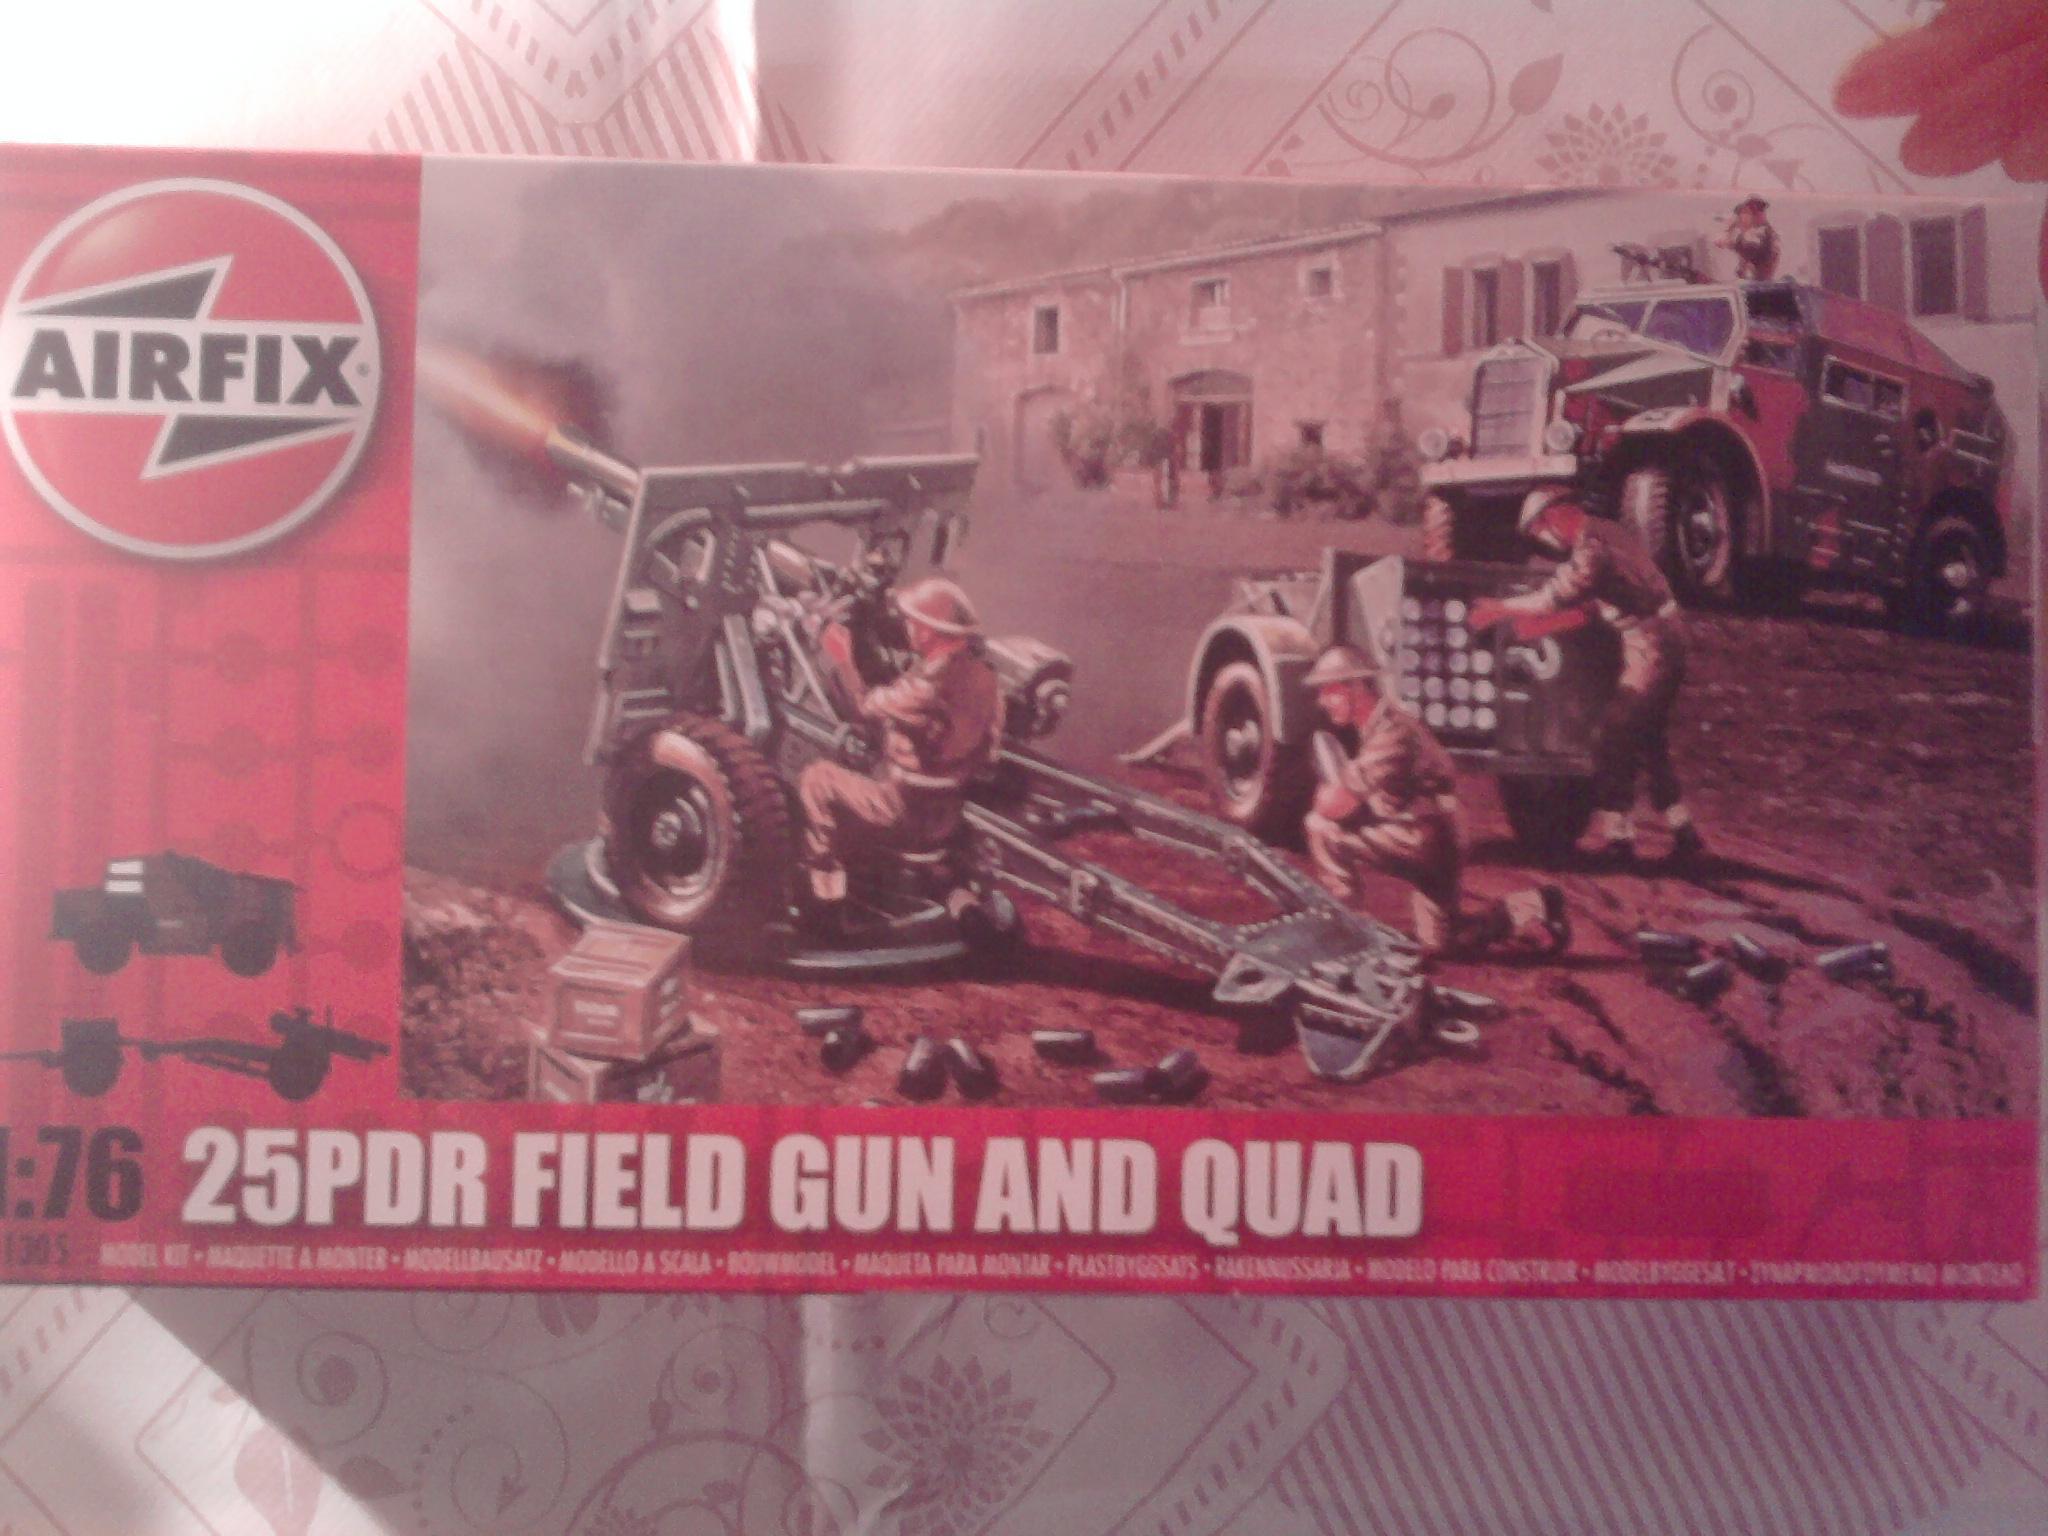 AIRFIX 1:76 25pdr 1900ft